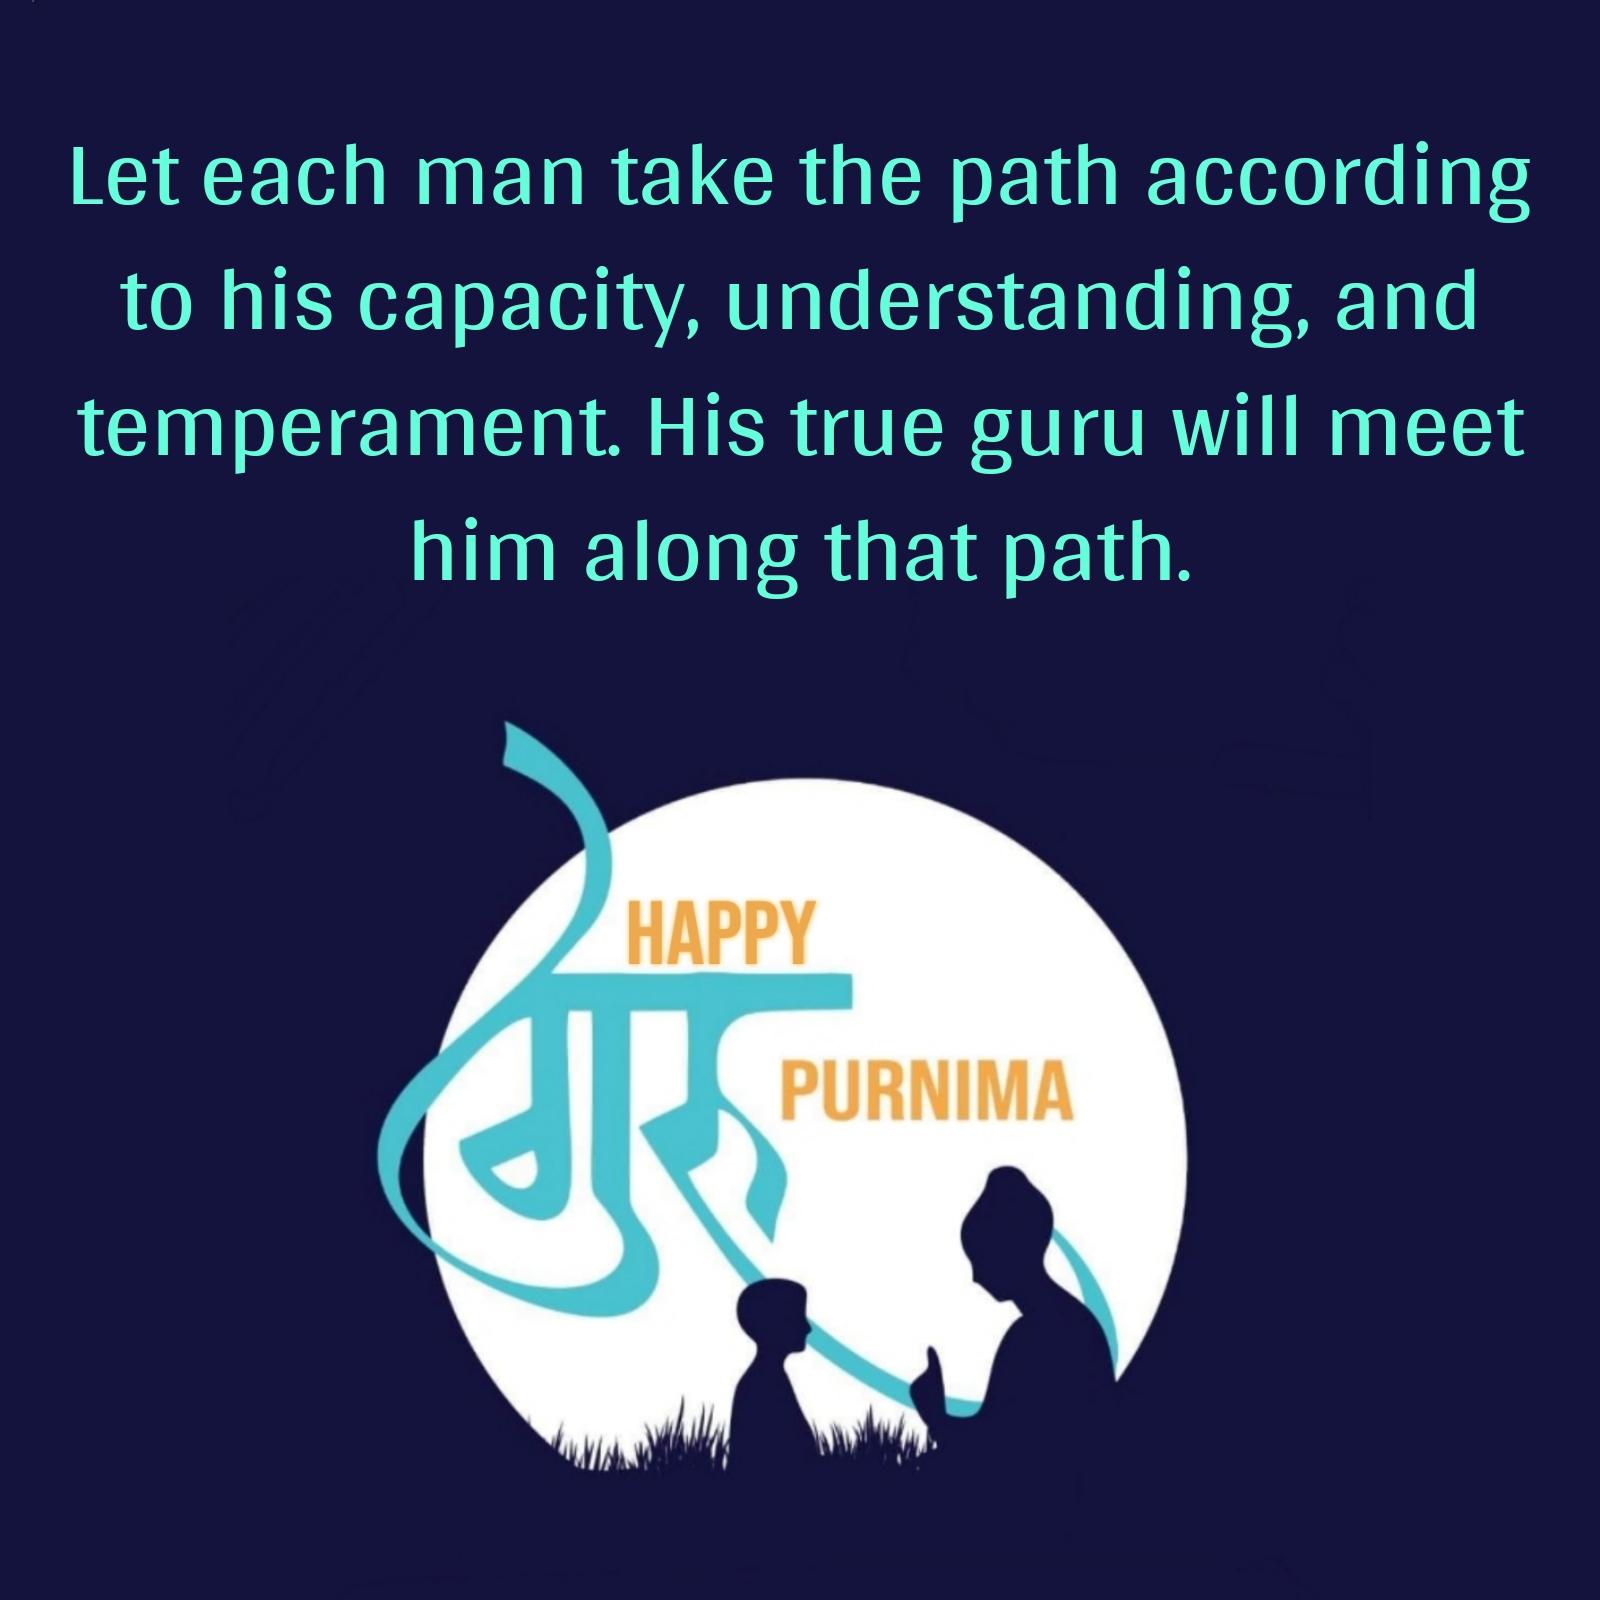 Let each man take the path according to his capacity understanding and temperament